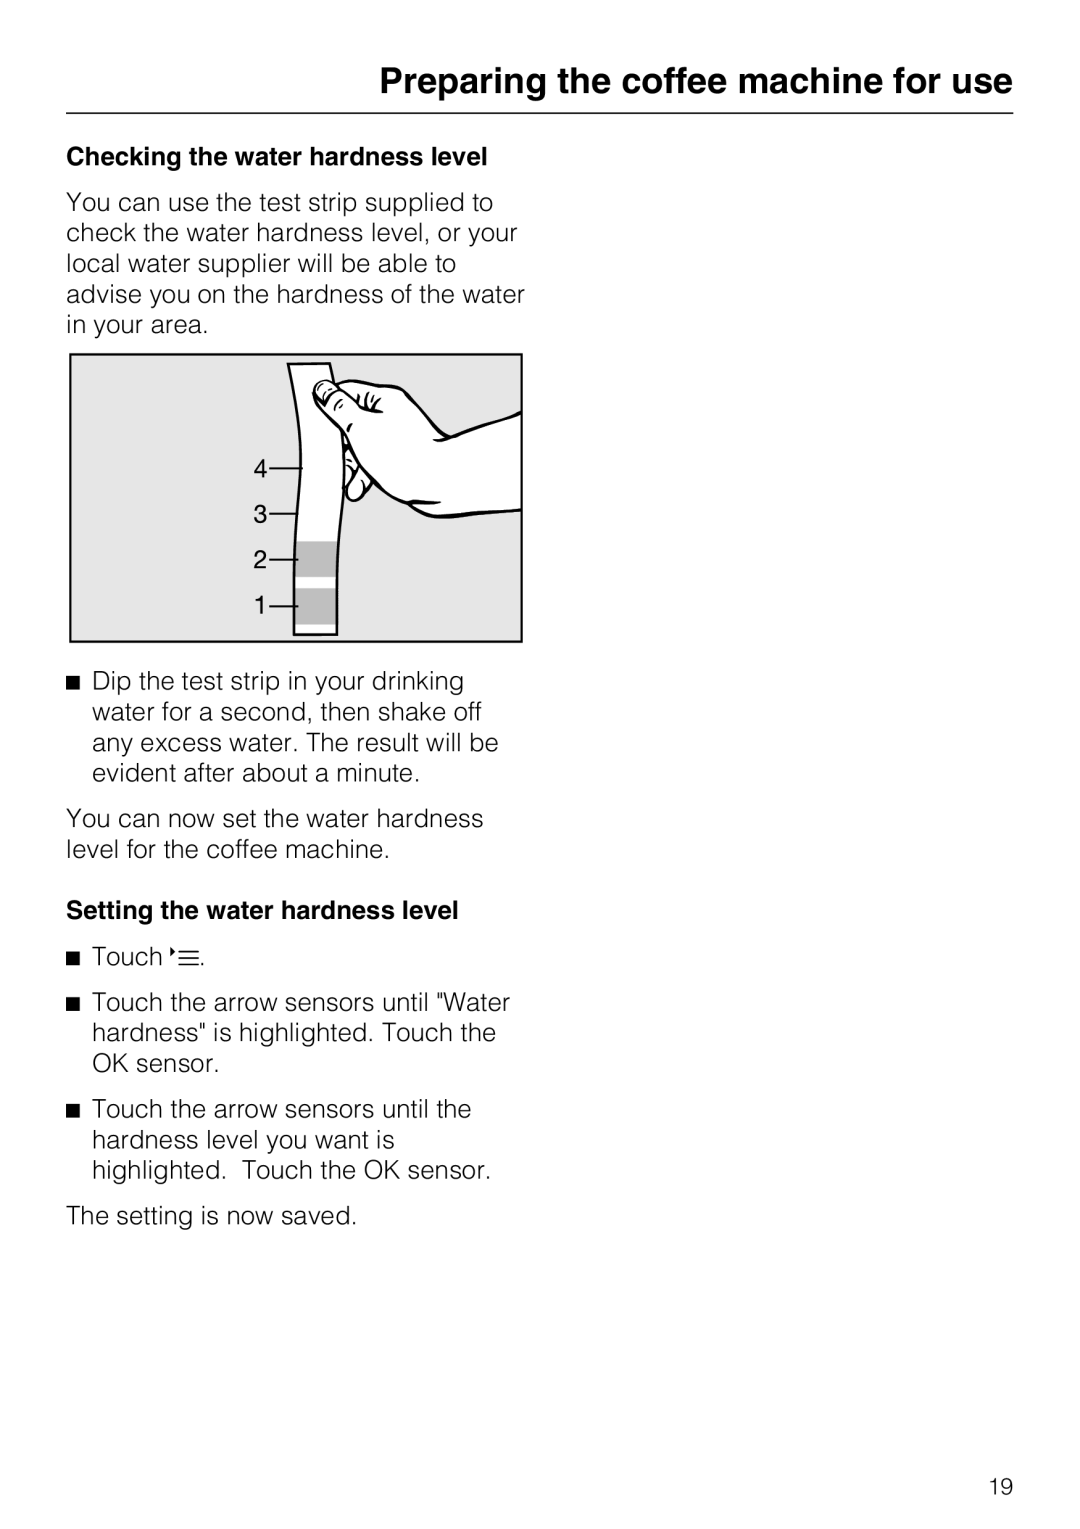 Miele CVA 6431 (C) installation instructions Preparing the coffee machine for use, Checking the water hardness level 